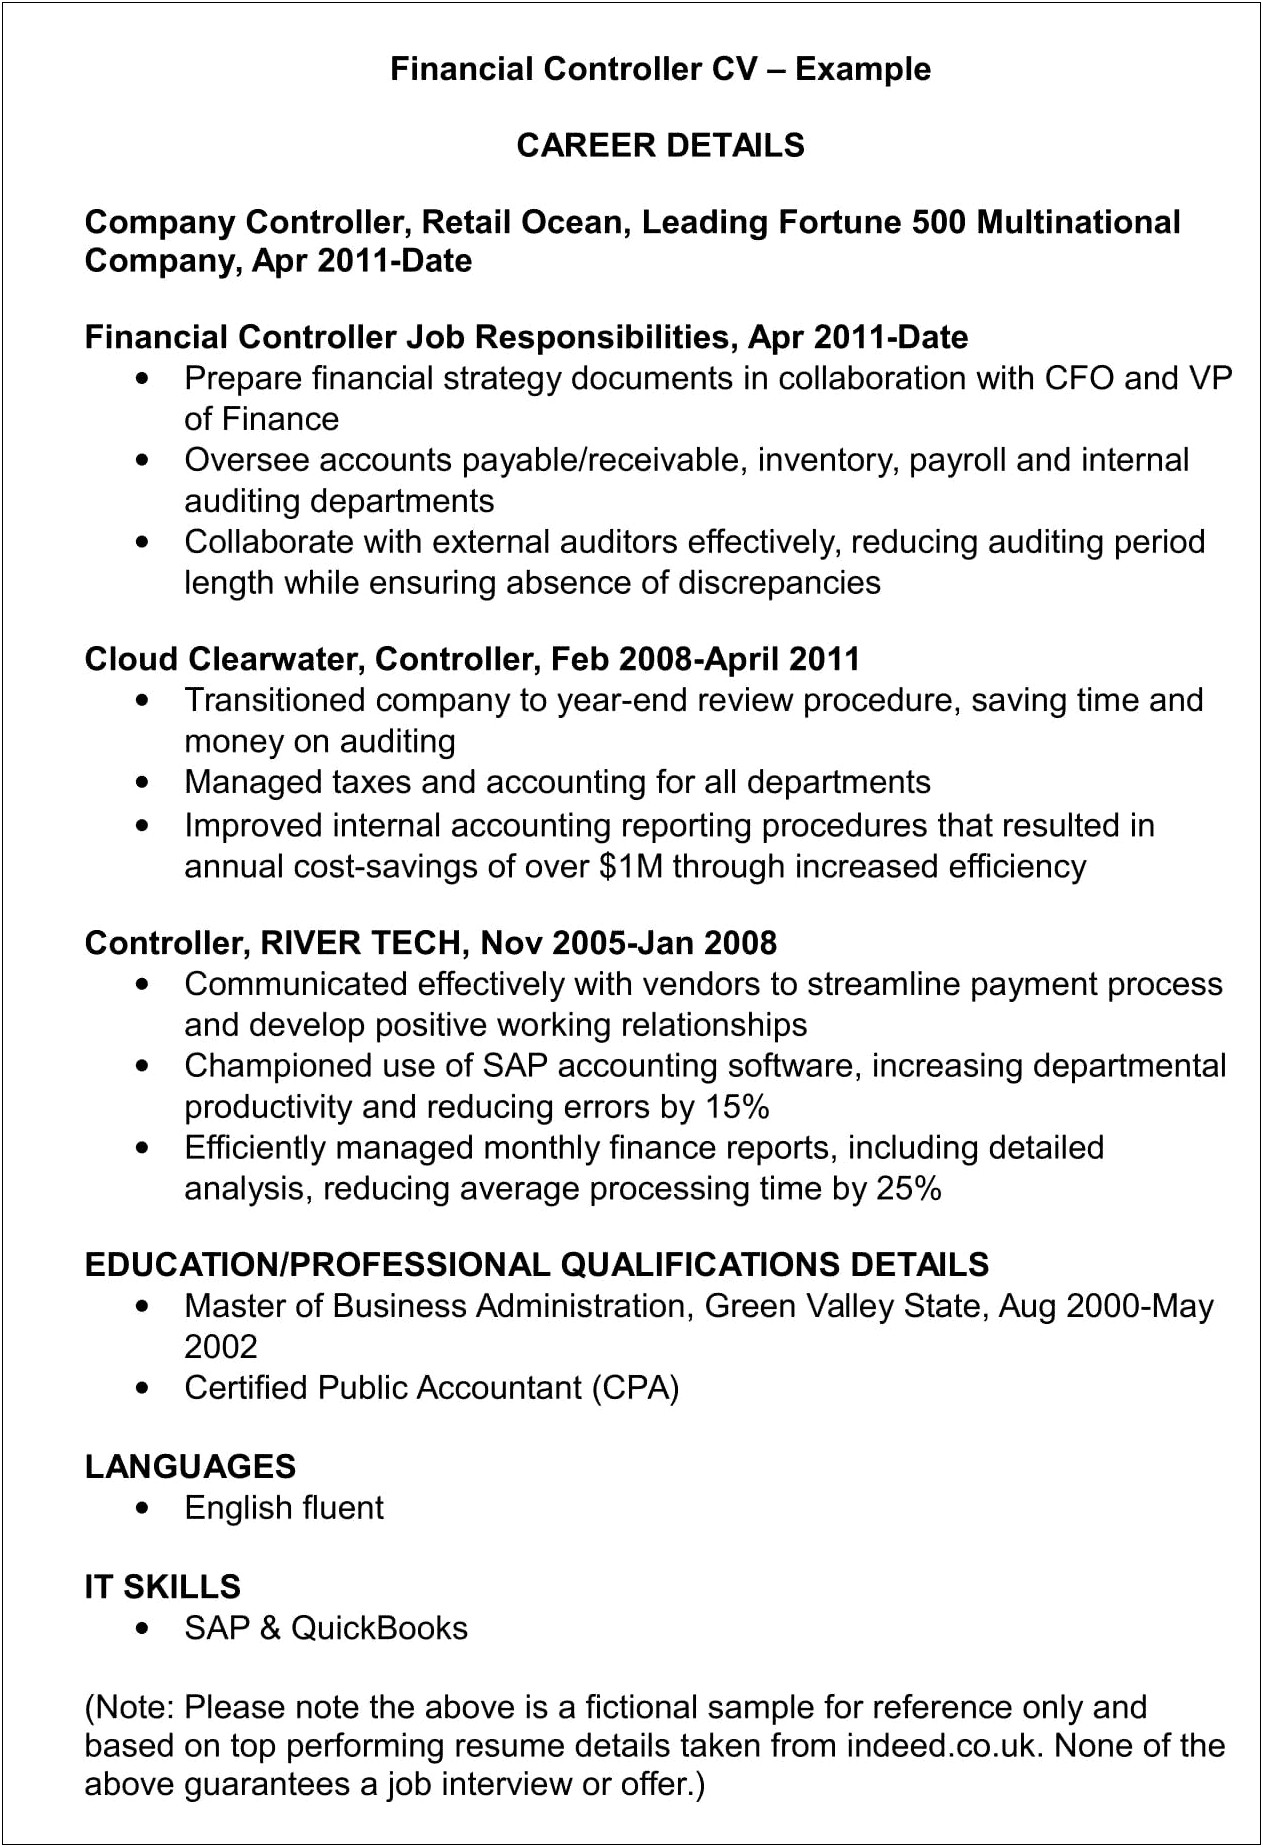 Sample Resume For Finacial Compliance Auditor